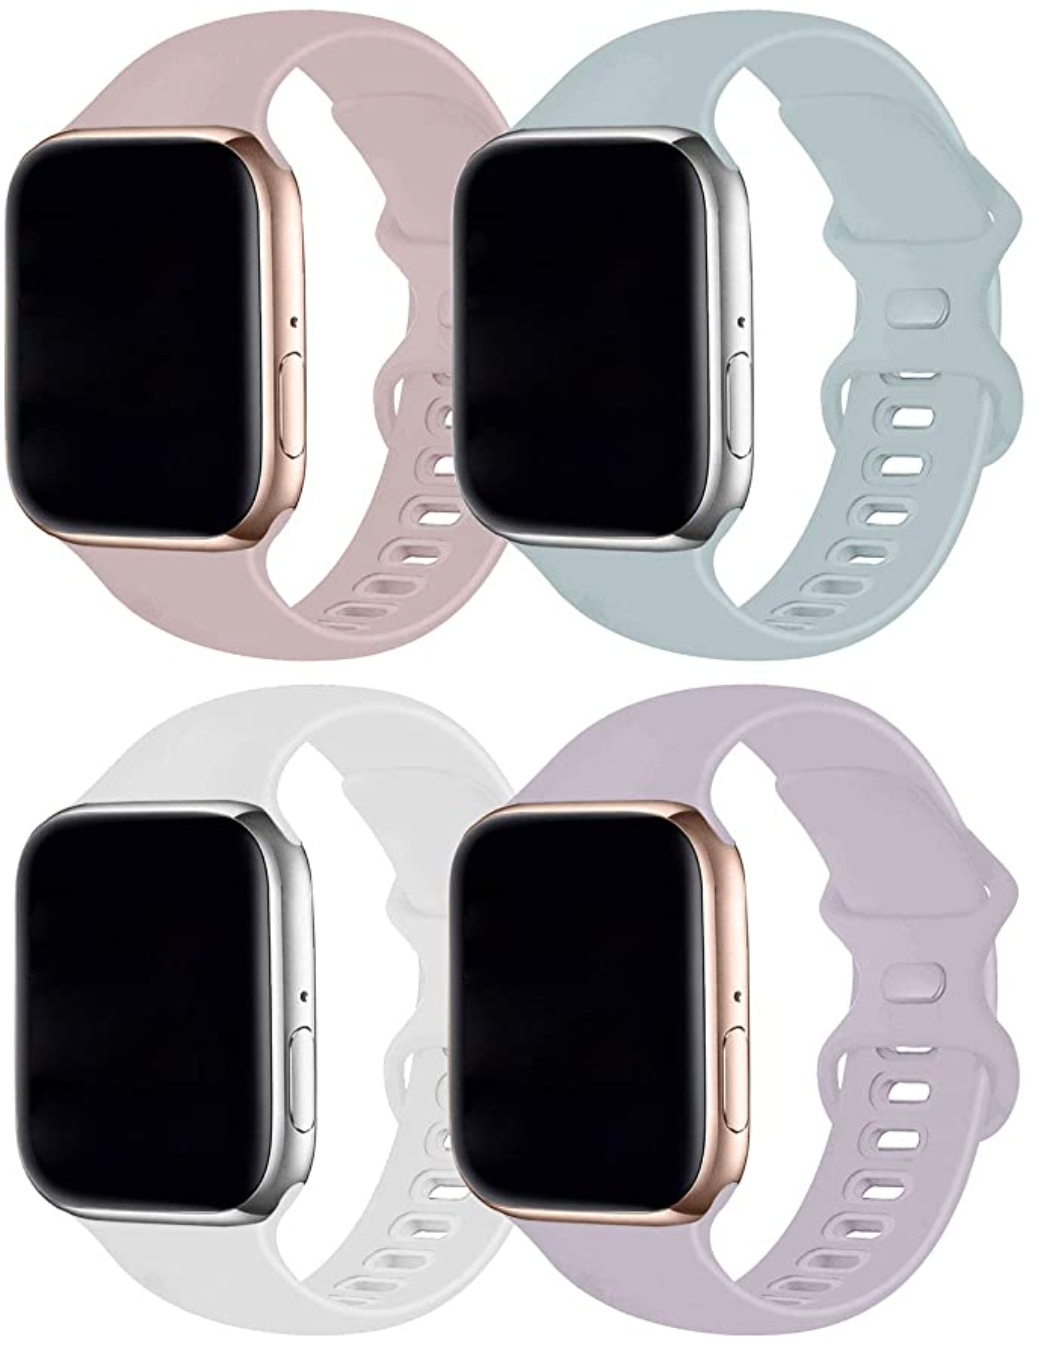 What I'be been Amazoning  apple watch bands 